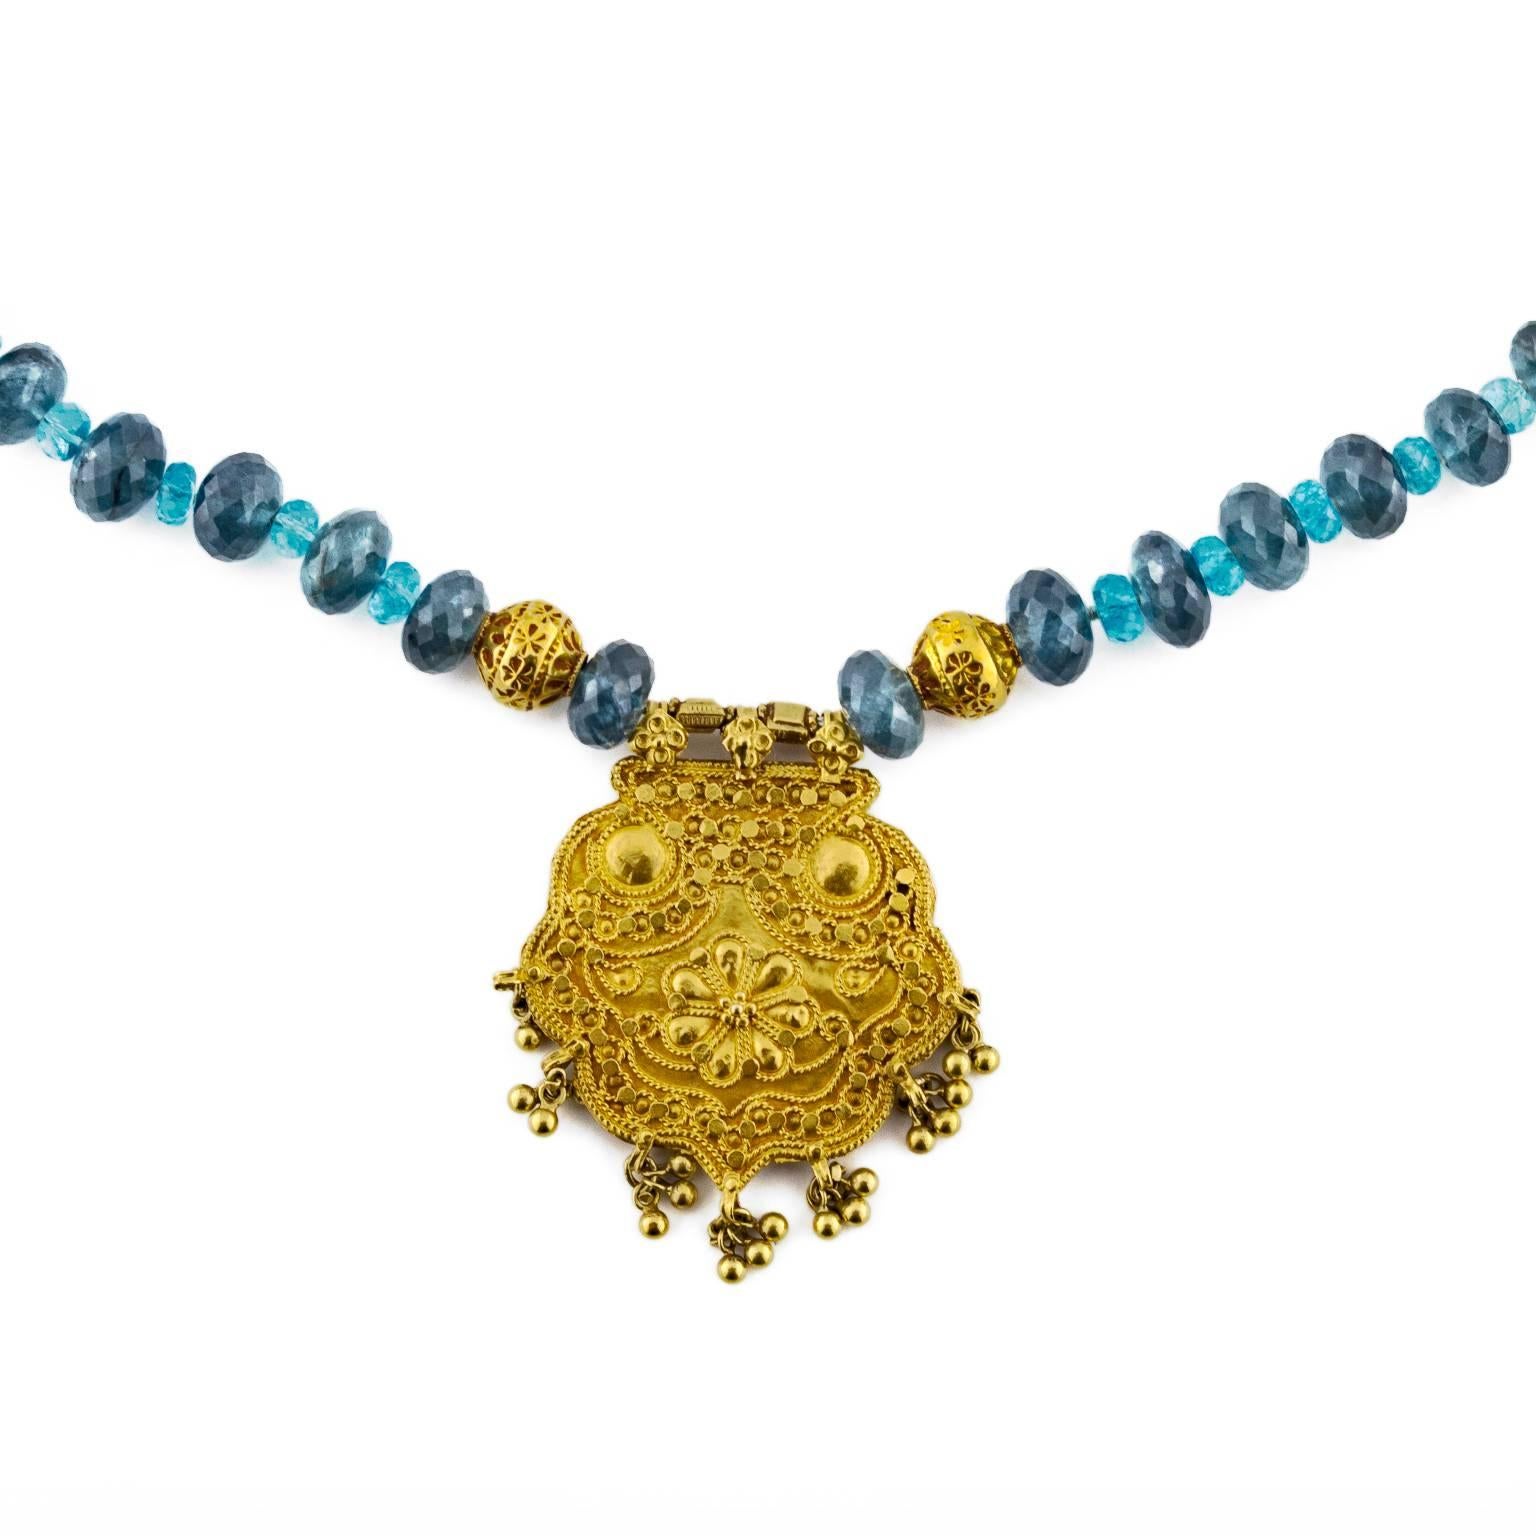 This beautiful combination of hues in moss aqua and apatite faceted beads sparkle and dazzle with a delicately carved and tasseled 18k medallion and accent beads. Easy to wear and layer....